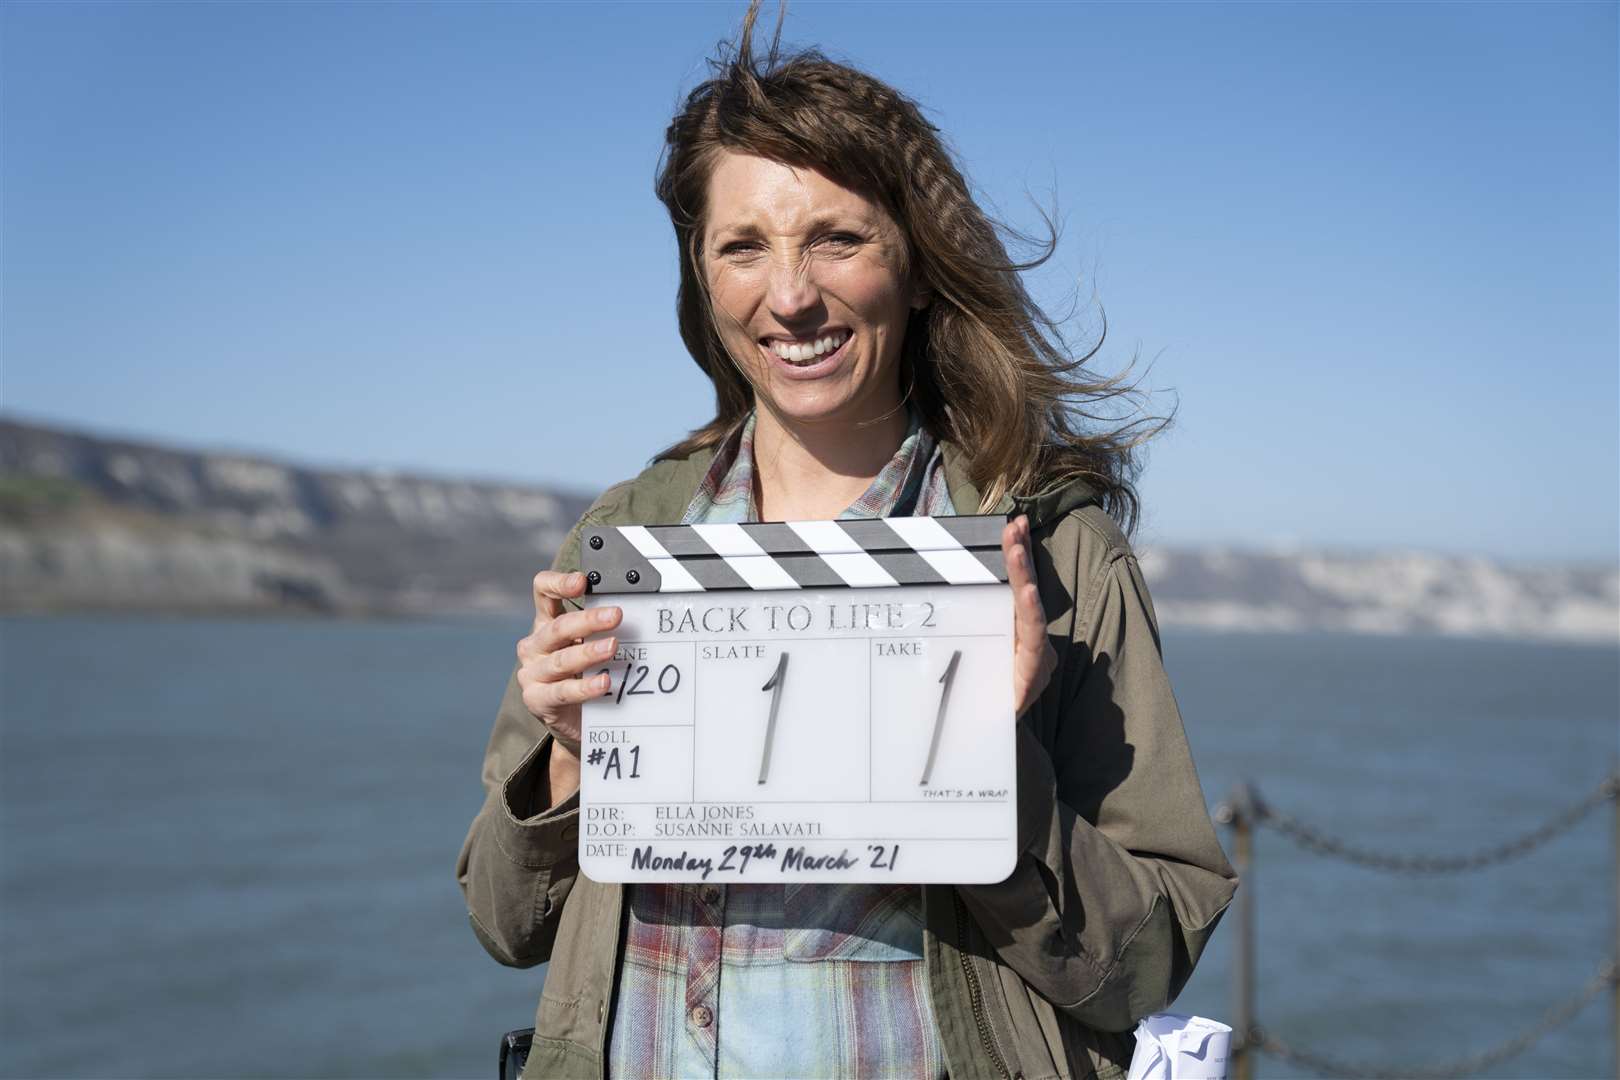 Filming has started for Back to Life series 2 - staring Daisy Haggard - in Folkestone and Hythe. Picture: Luke Varley